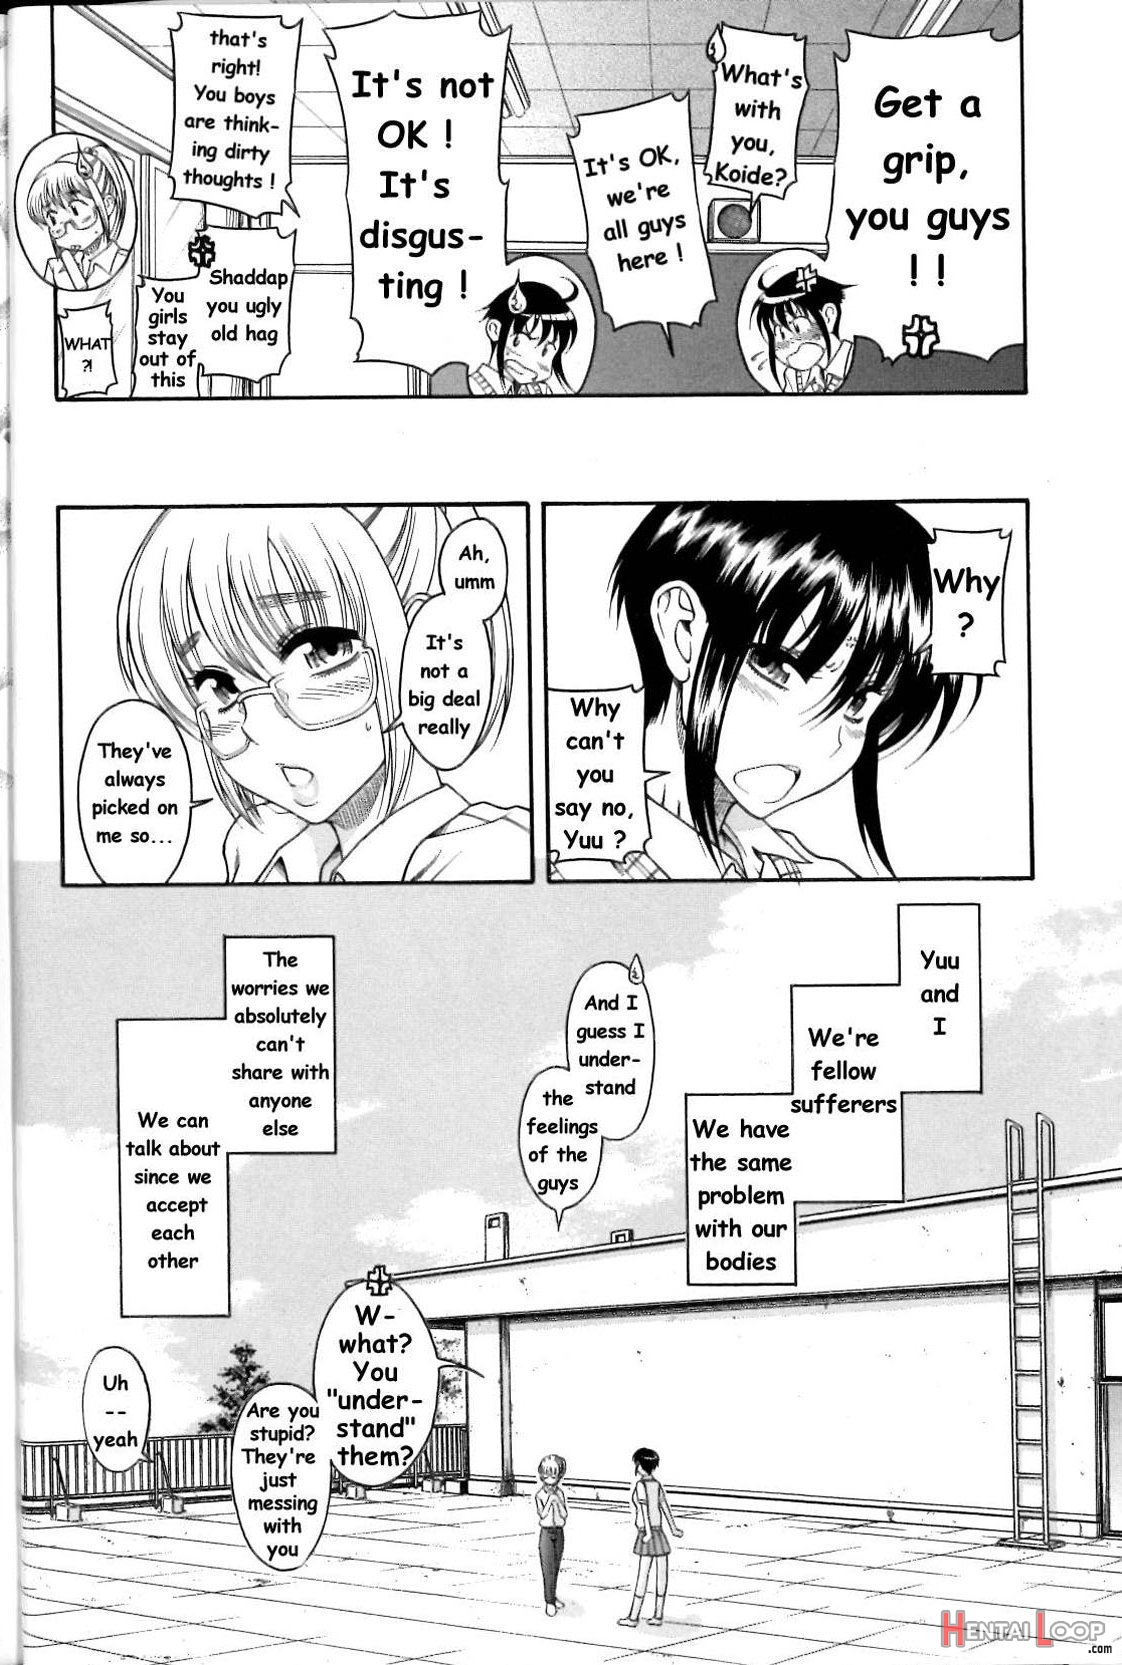 Boy Meets Girl, Girl Meets Boy 2- Single Page Version page 8